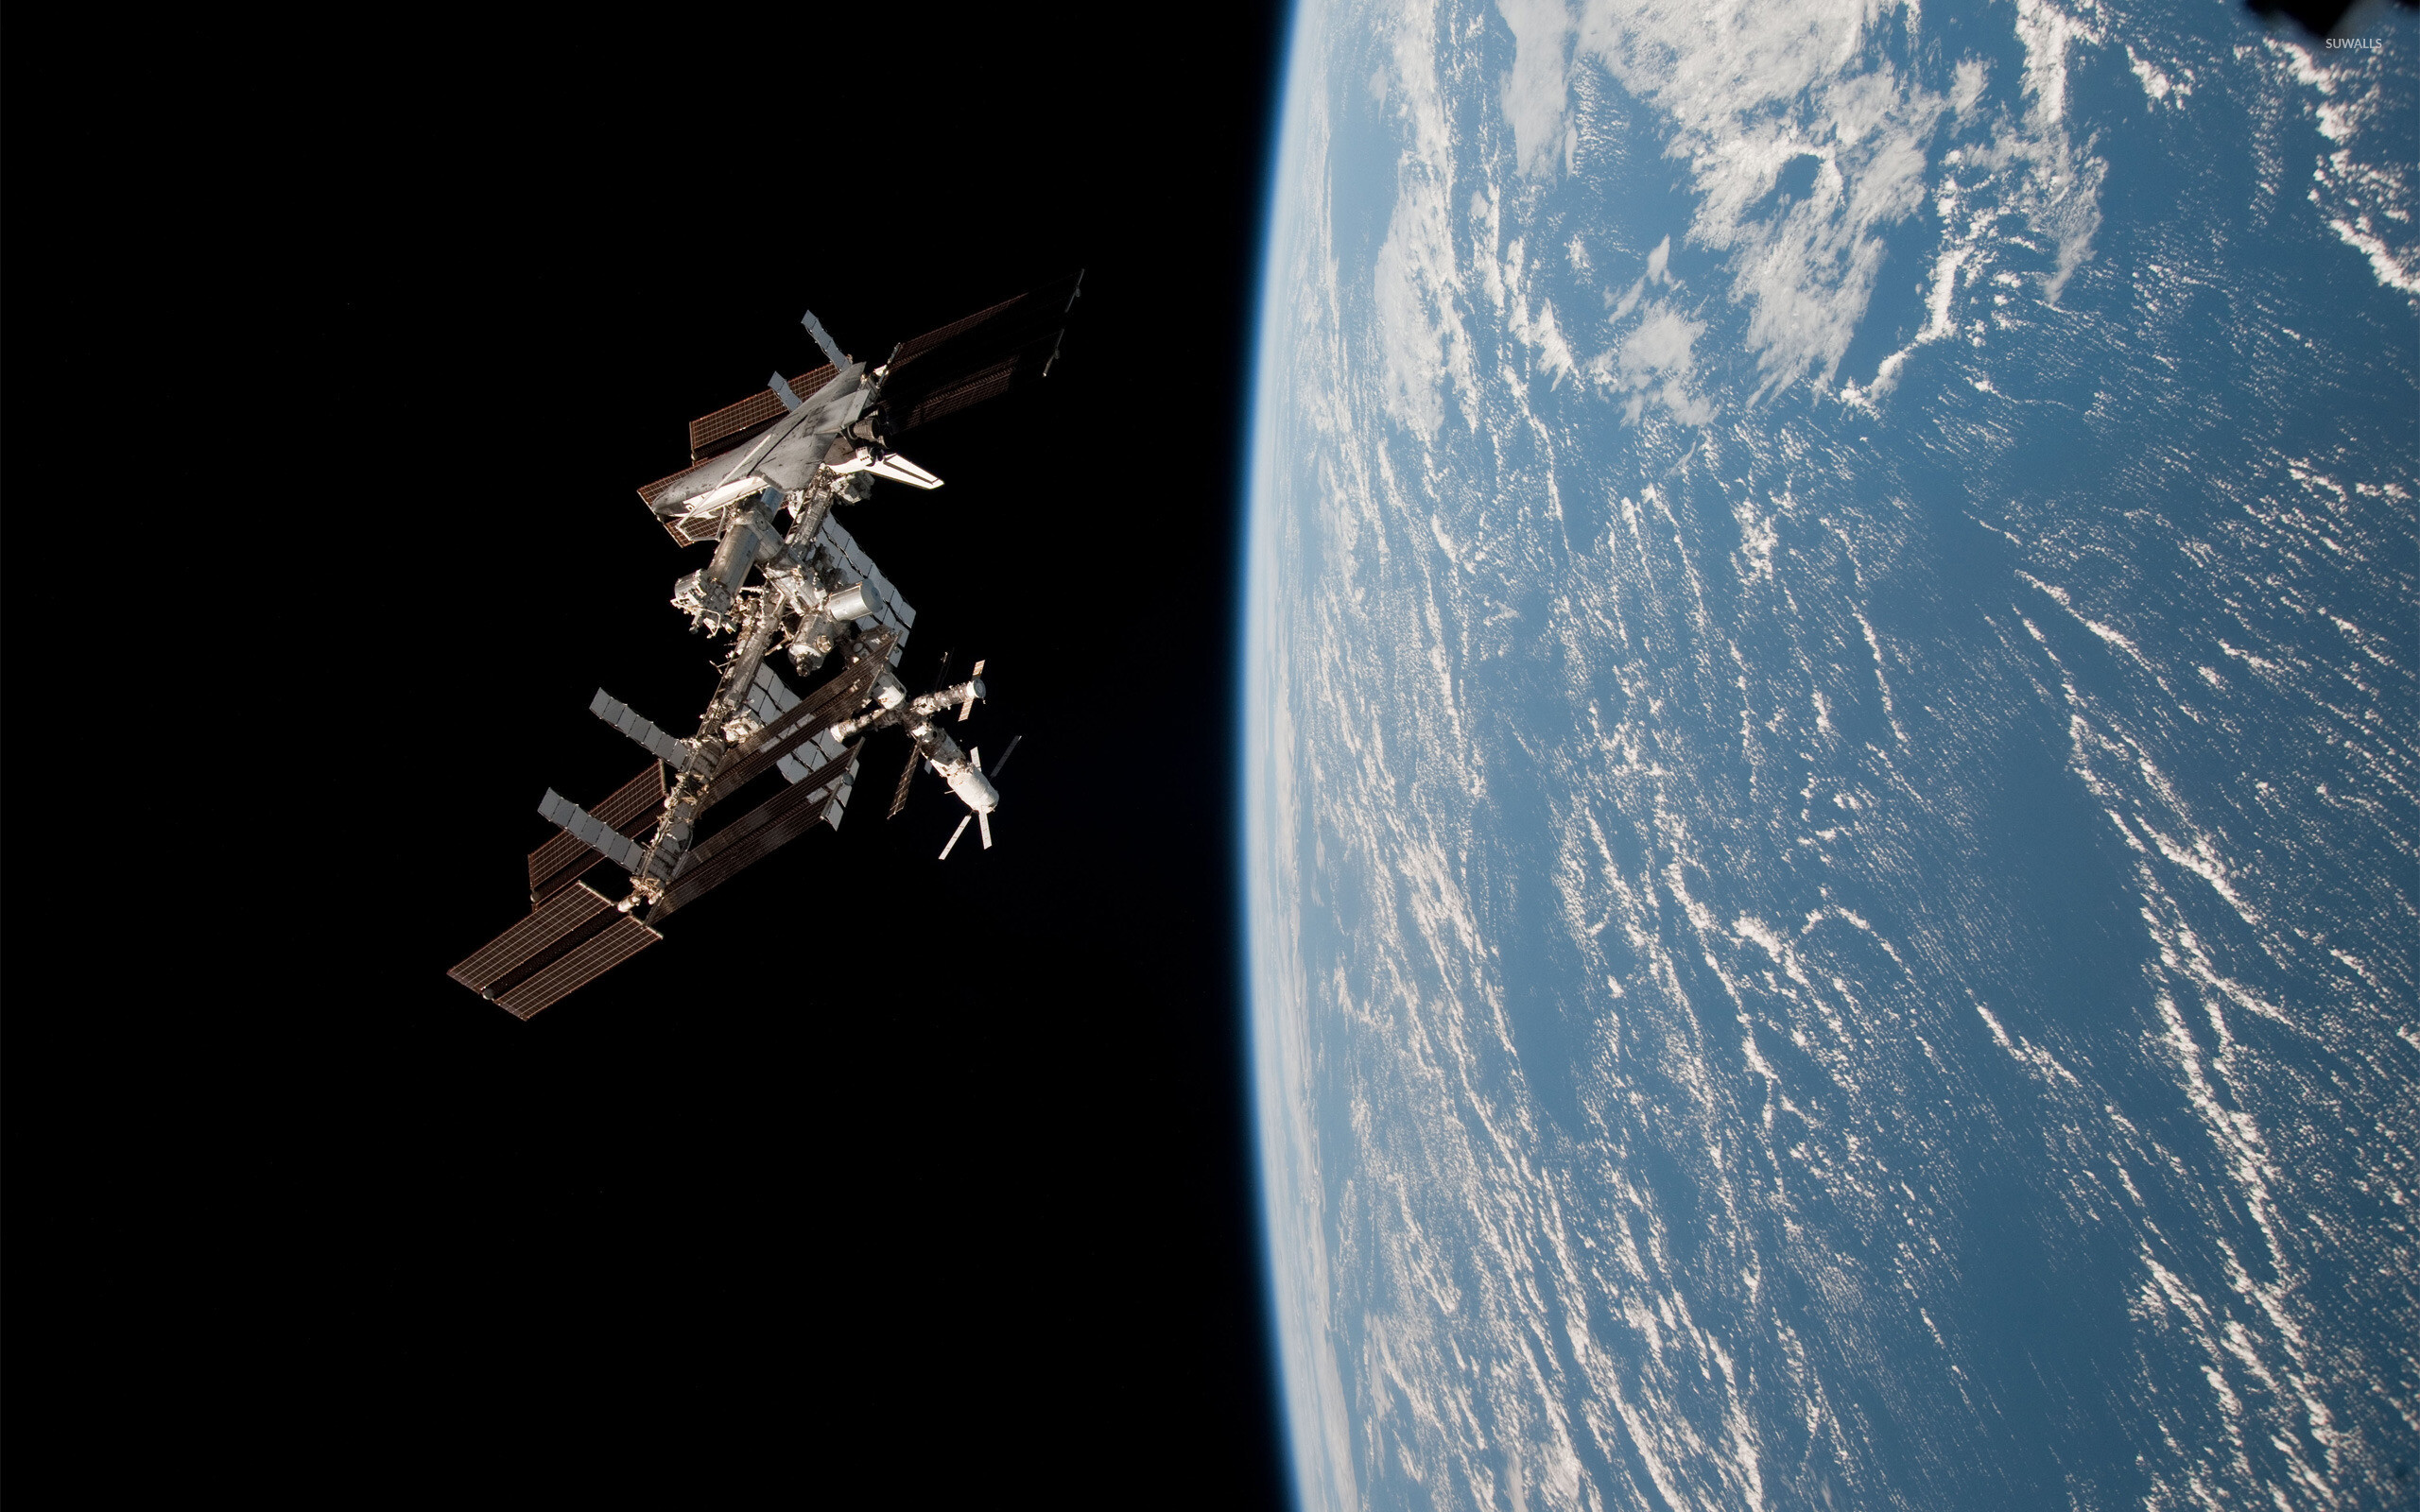 International Space Station, Space exploration, Astronaut's perspective, Tranquil beauty, 2560x1600 HD Desktop